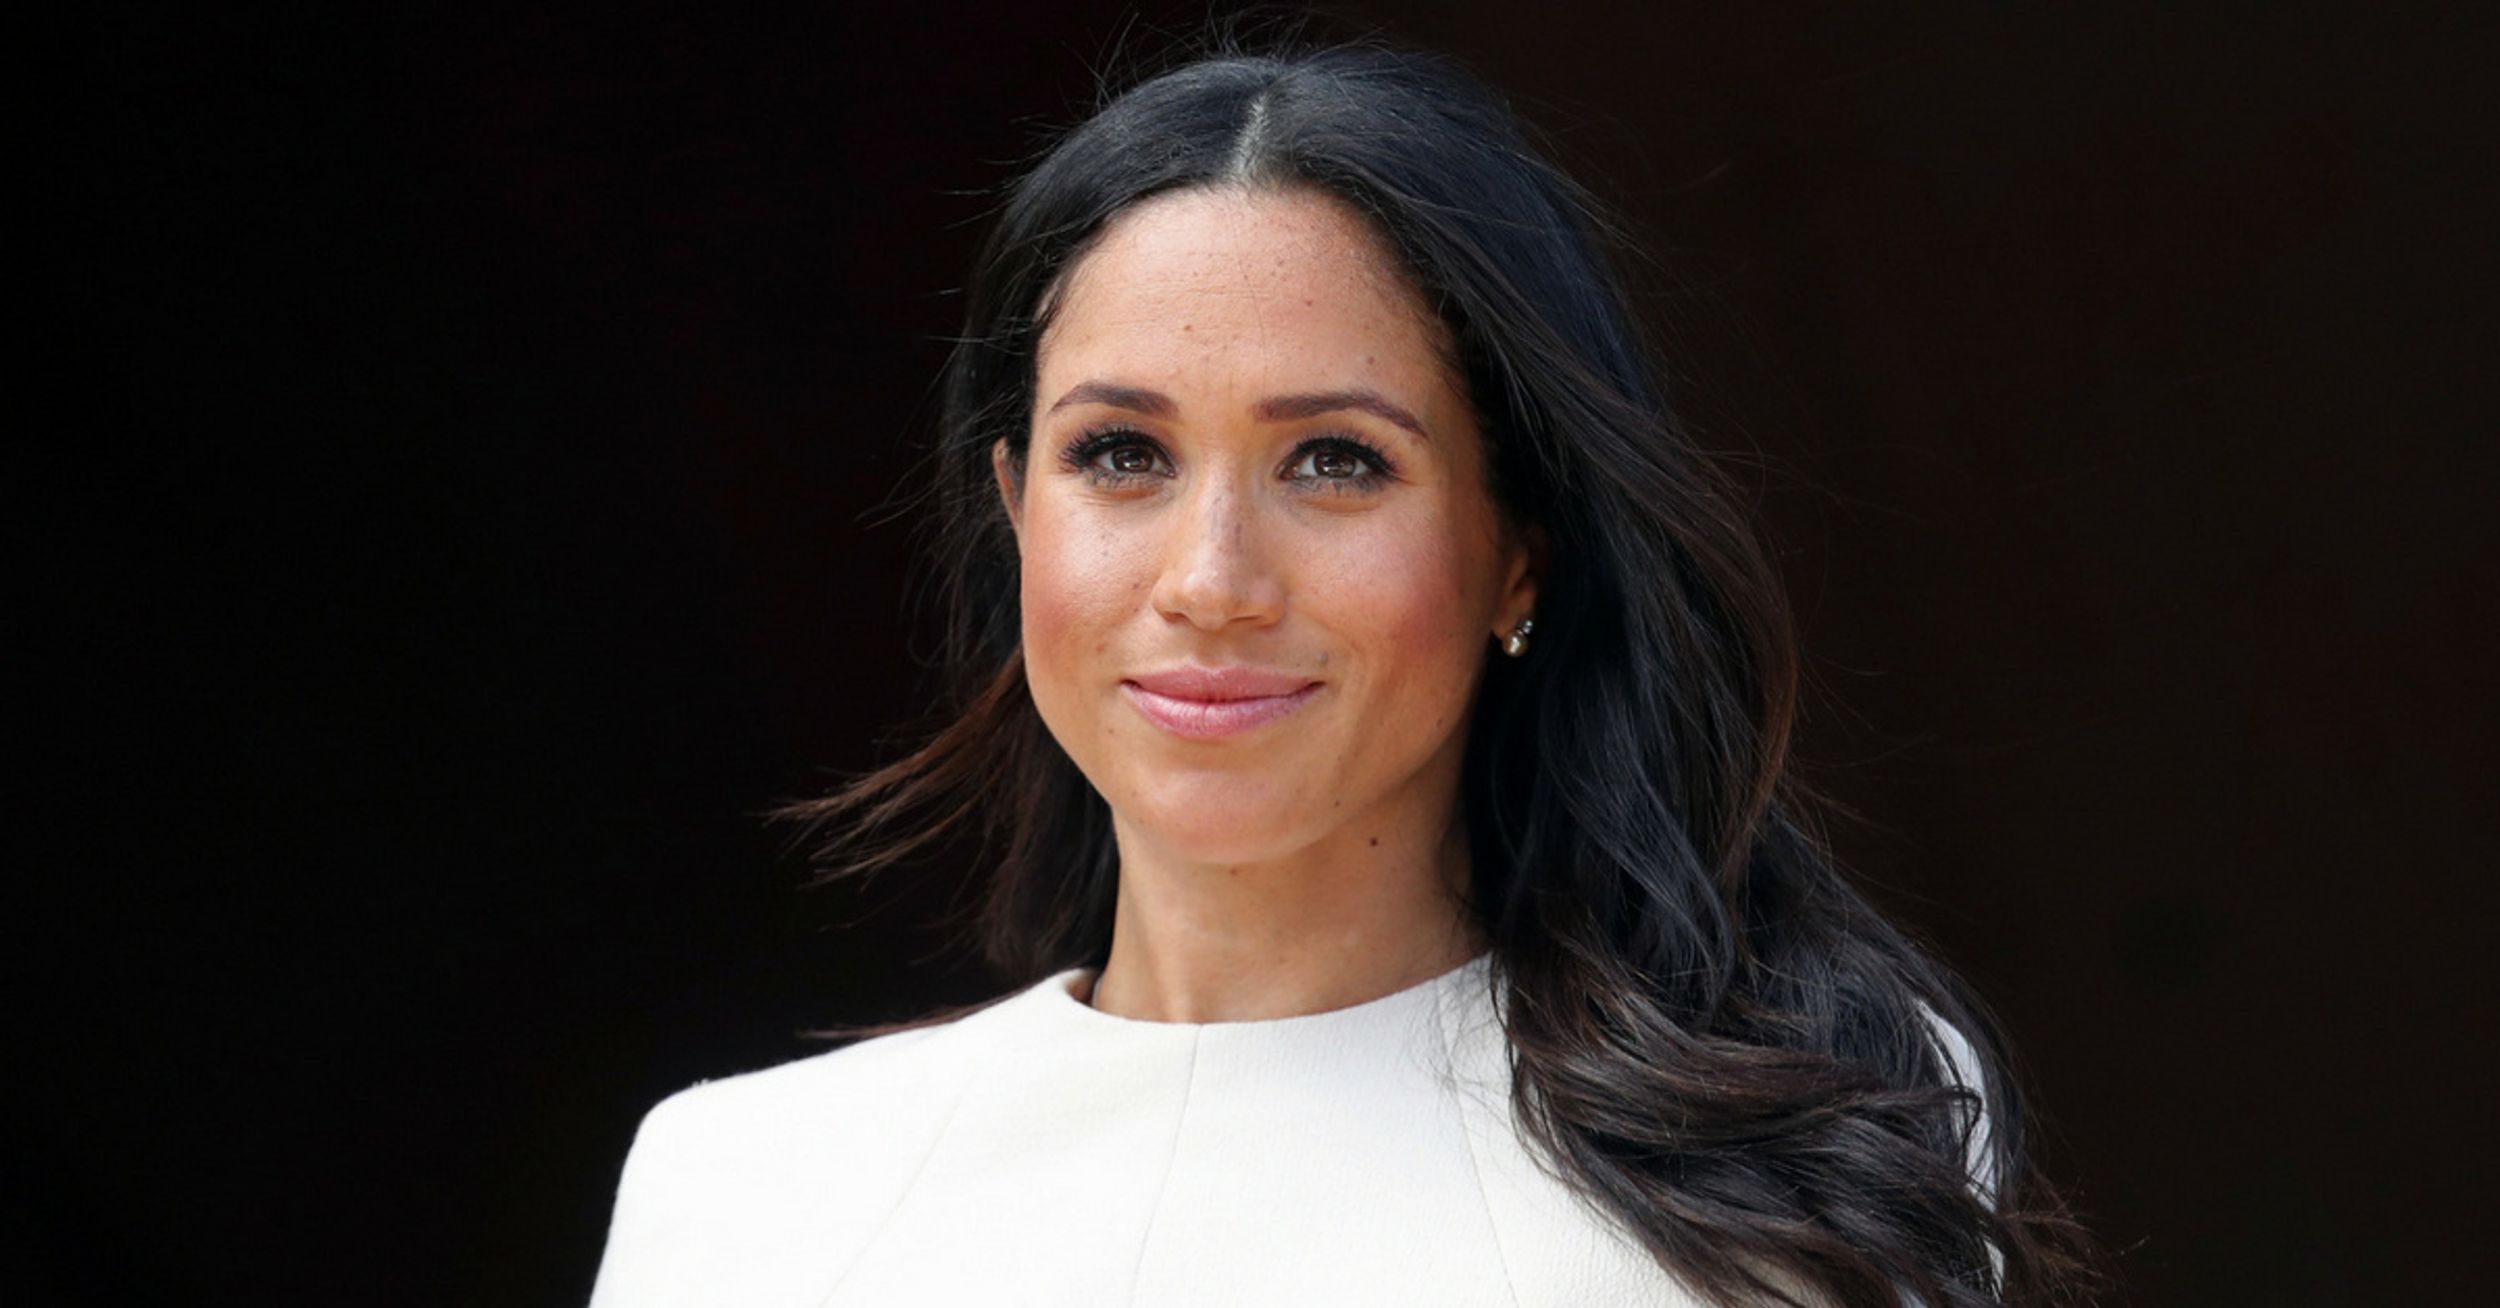 The List Of Foods Meghan Markle Can't Eat As A Royal Has Our Taste Buds Weeping